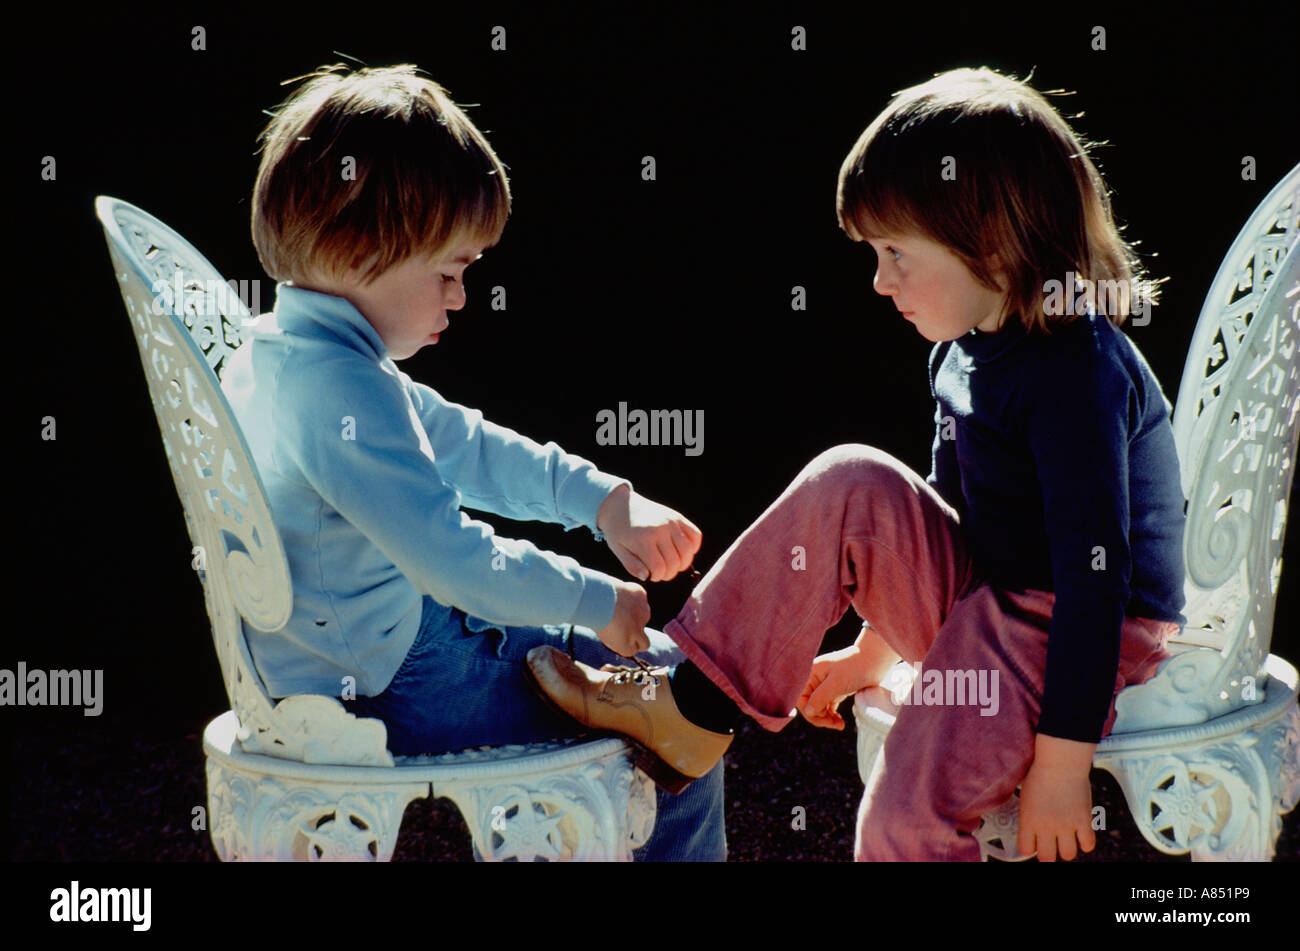 Two boys sitting on garden chairs. Doing up shoe laces. Stock Photo